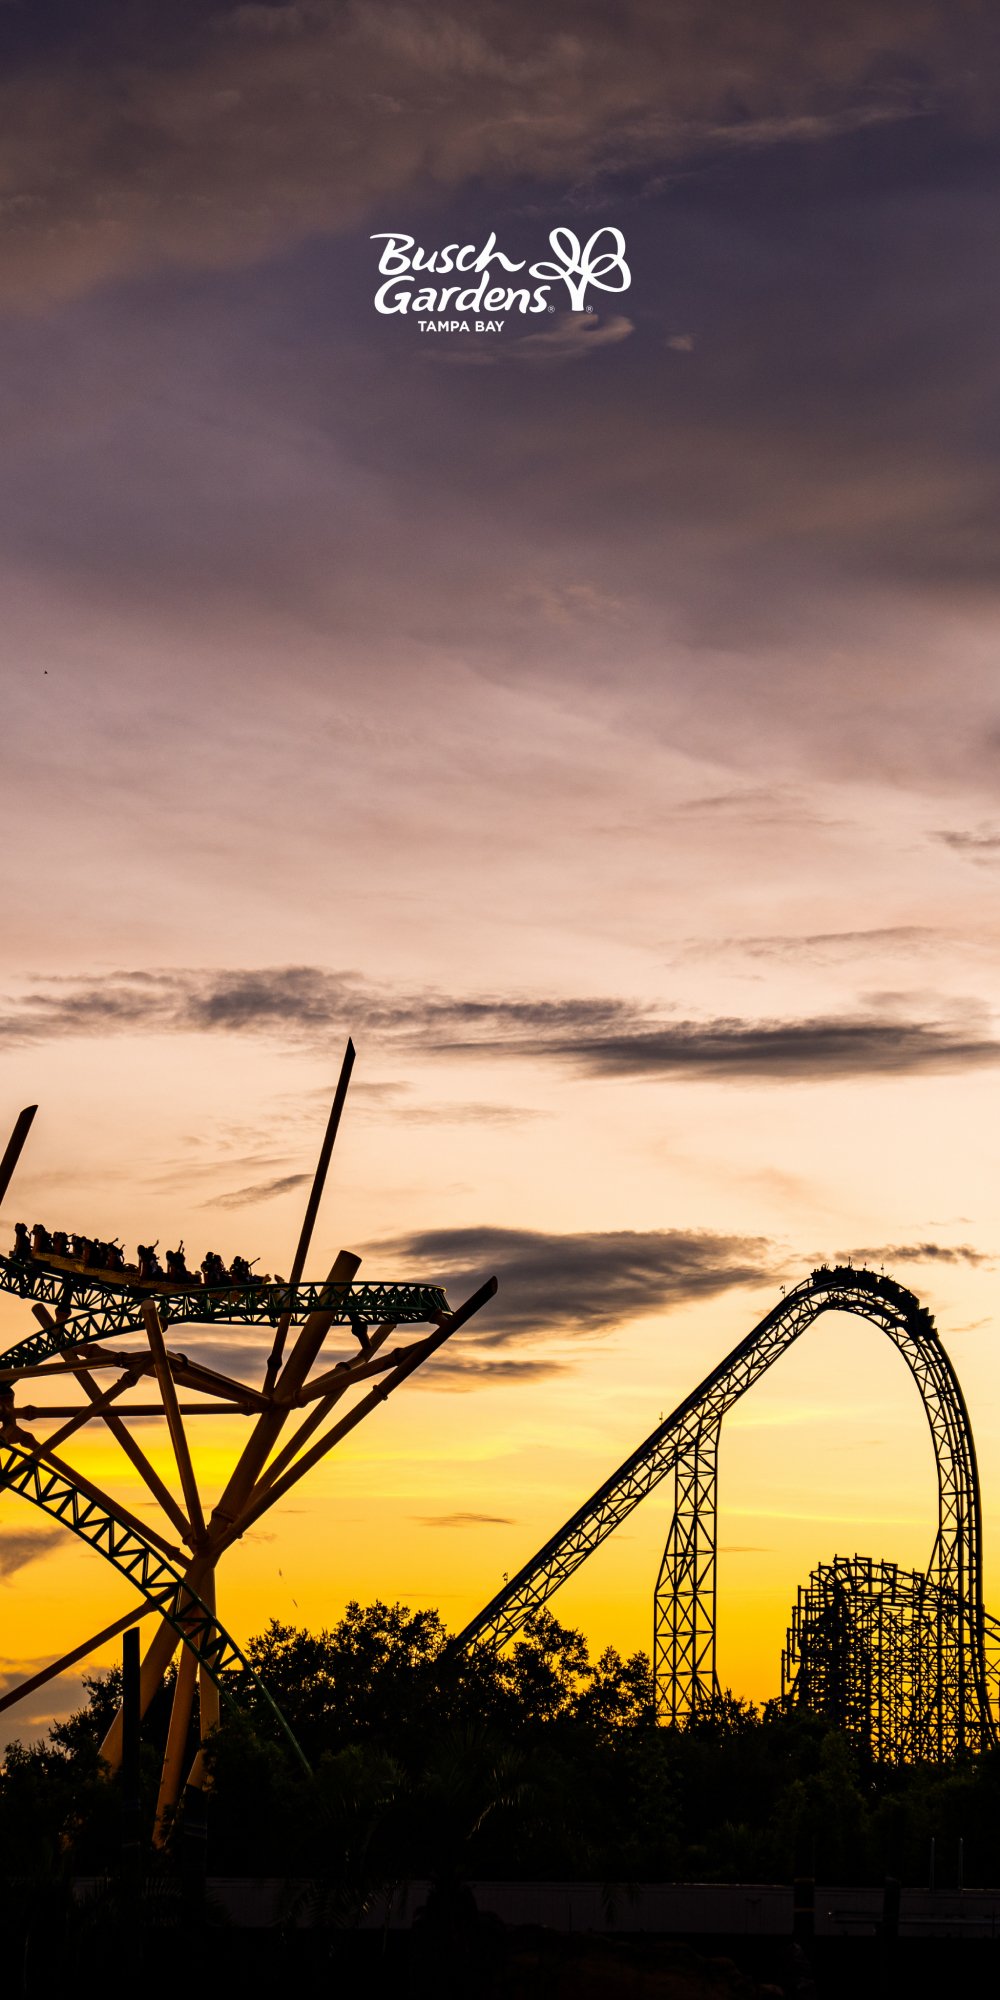 Cheetah Hunt in the sunset during Summer Nights at Busch Gardens Tampa Bay.